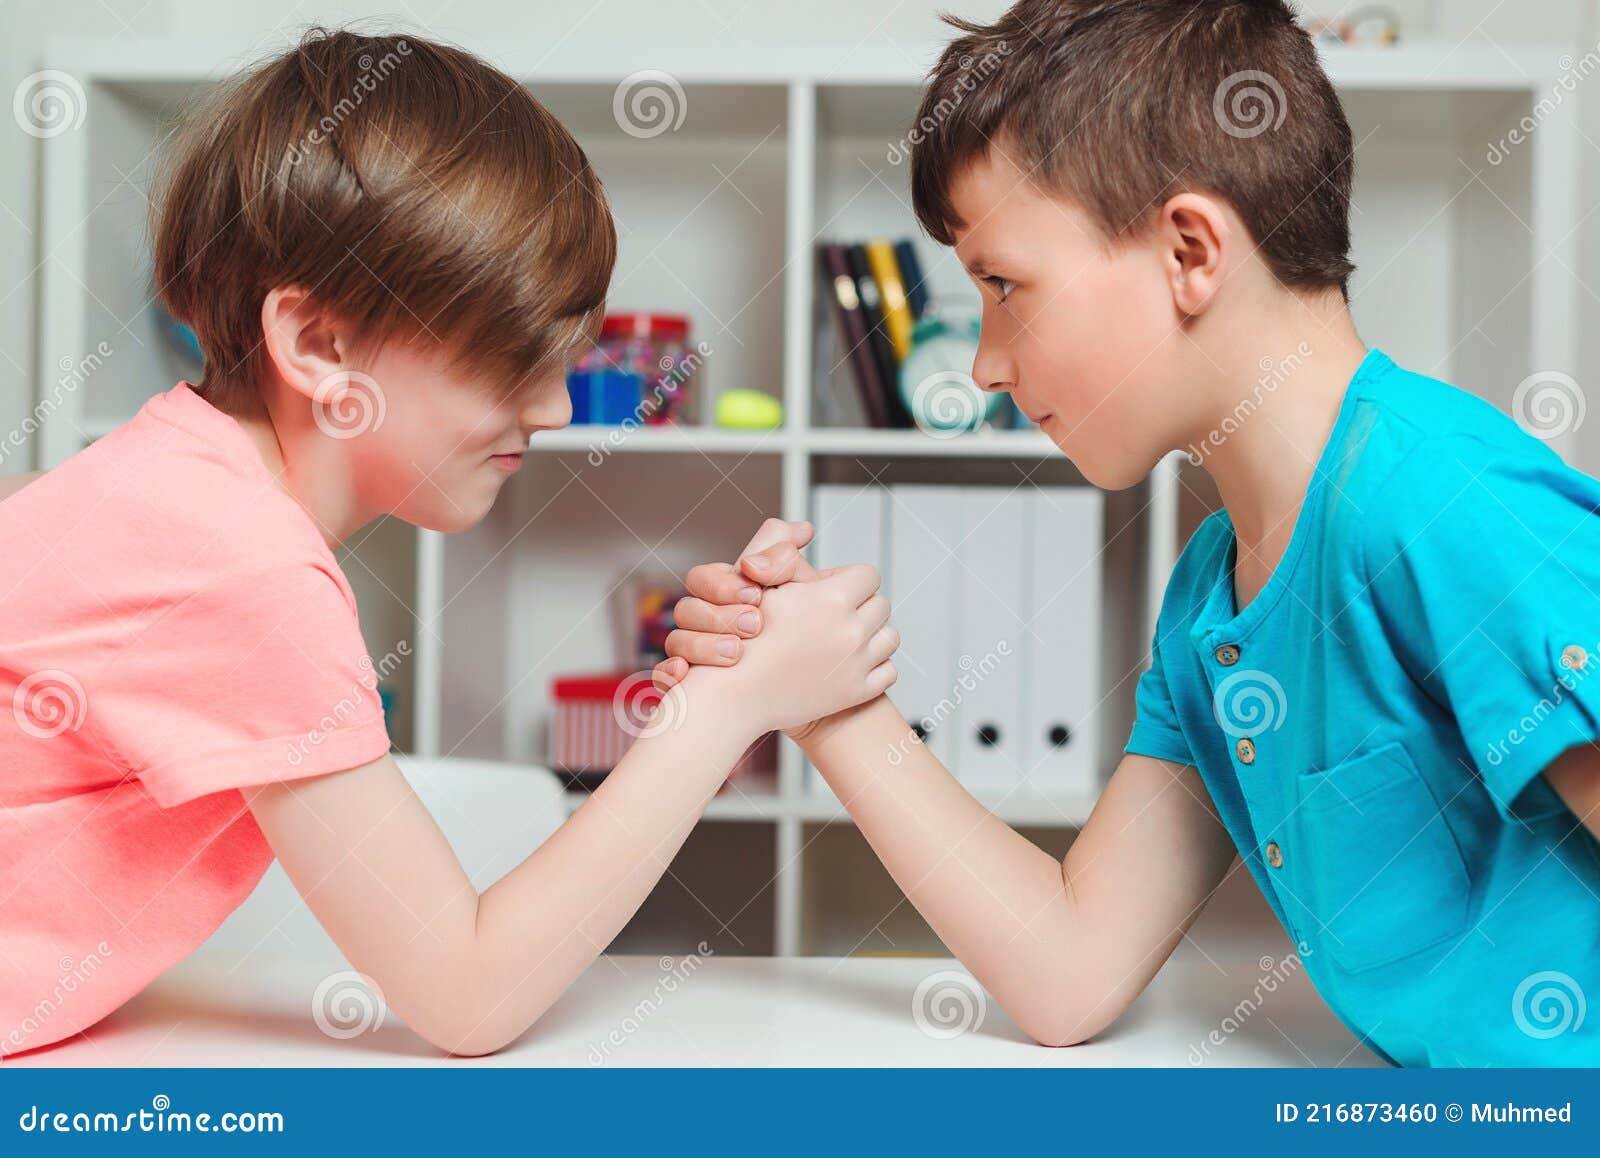 happy friends playing arm wrestle looking at each other. cute brothers spending time together at home